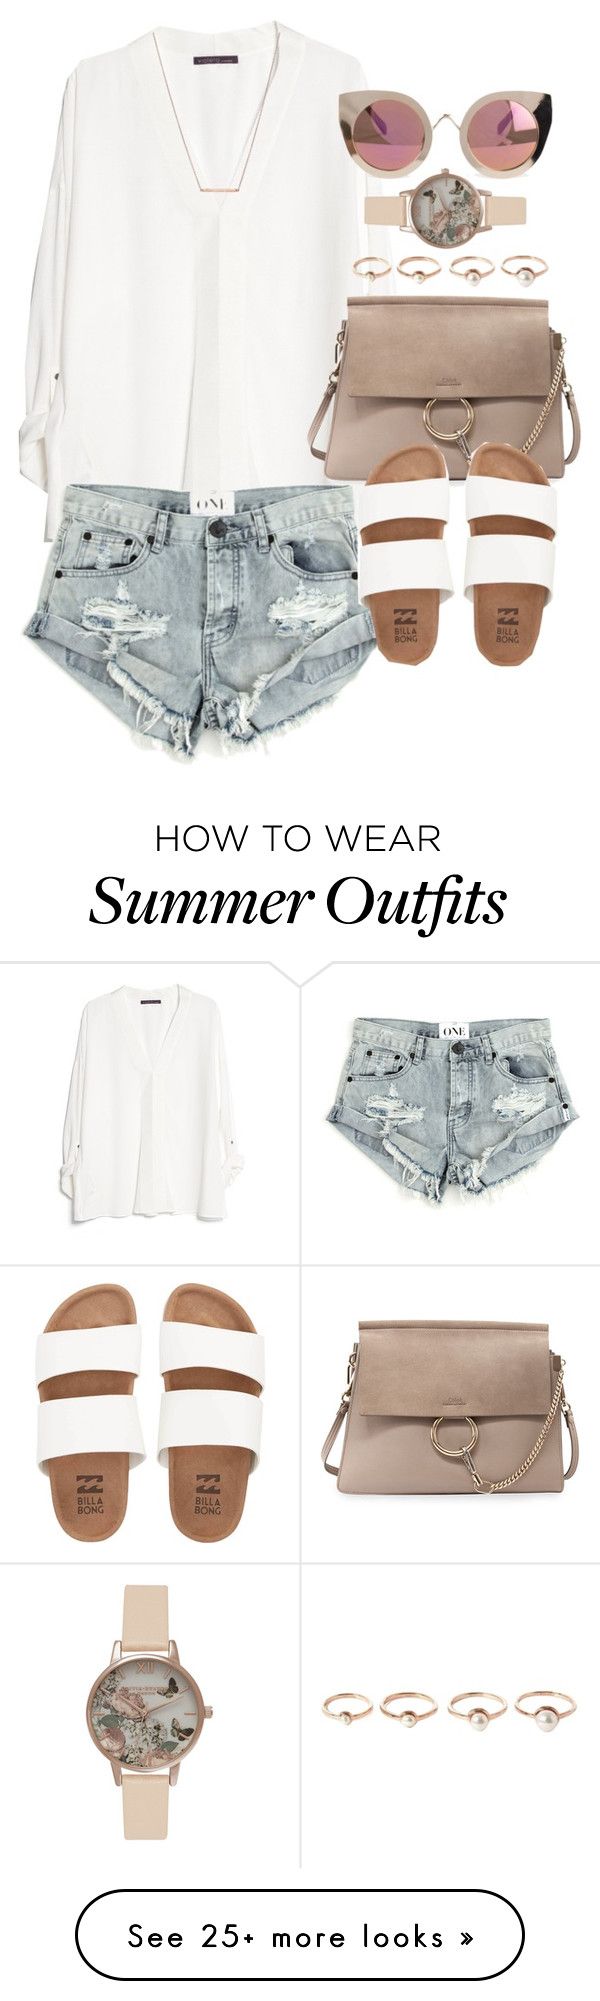 "Outfit for summer with rose gold accessories" by ferned on Polyvore f...